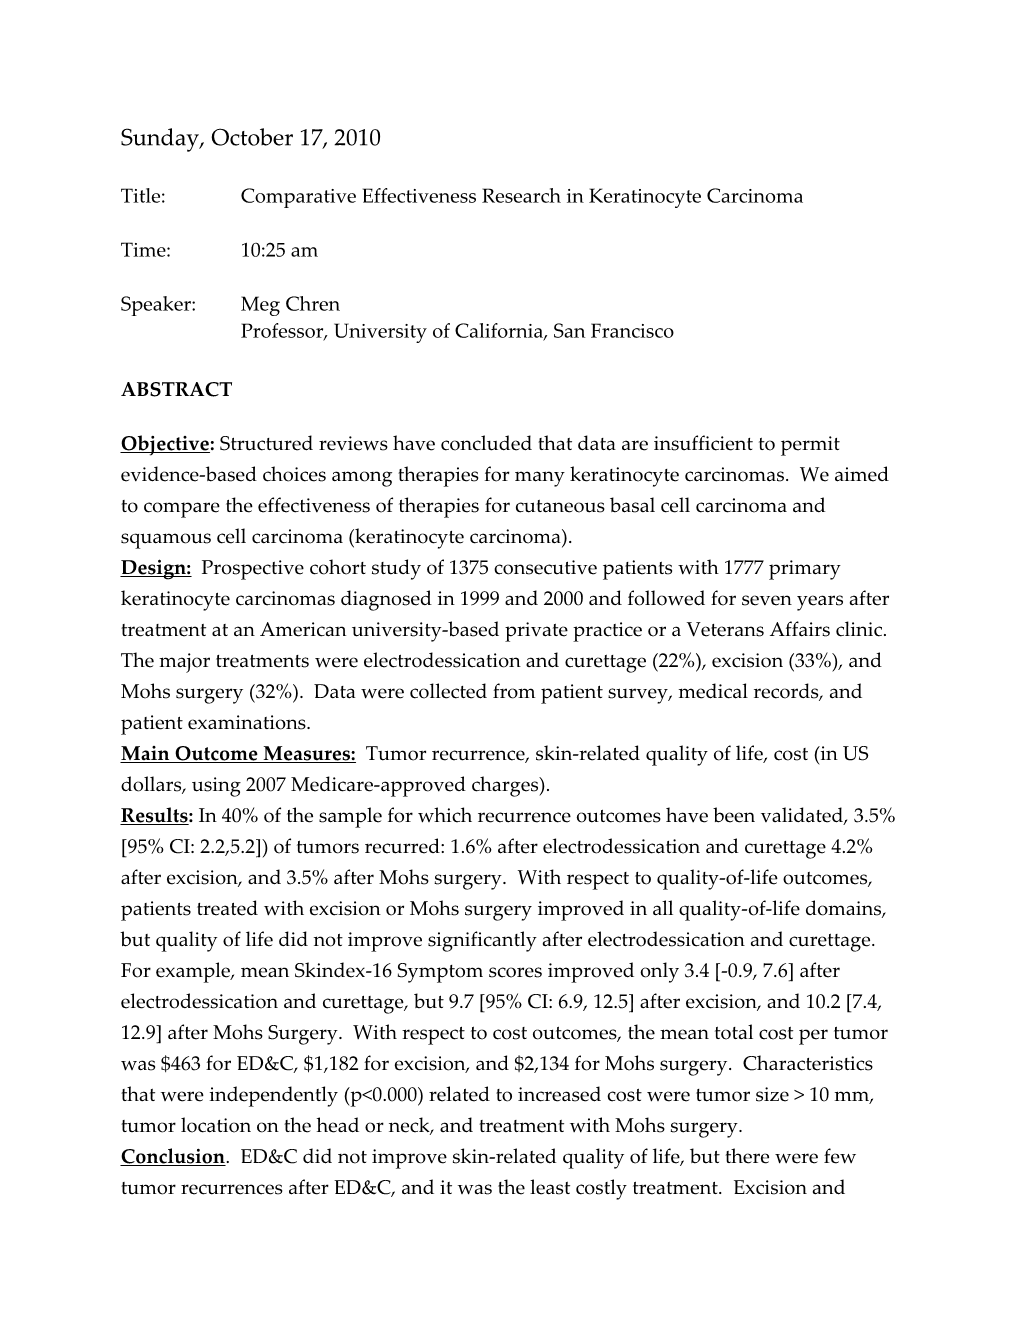 Title: Comparative Effectiveness Research in Keratinocyte Carcinoma